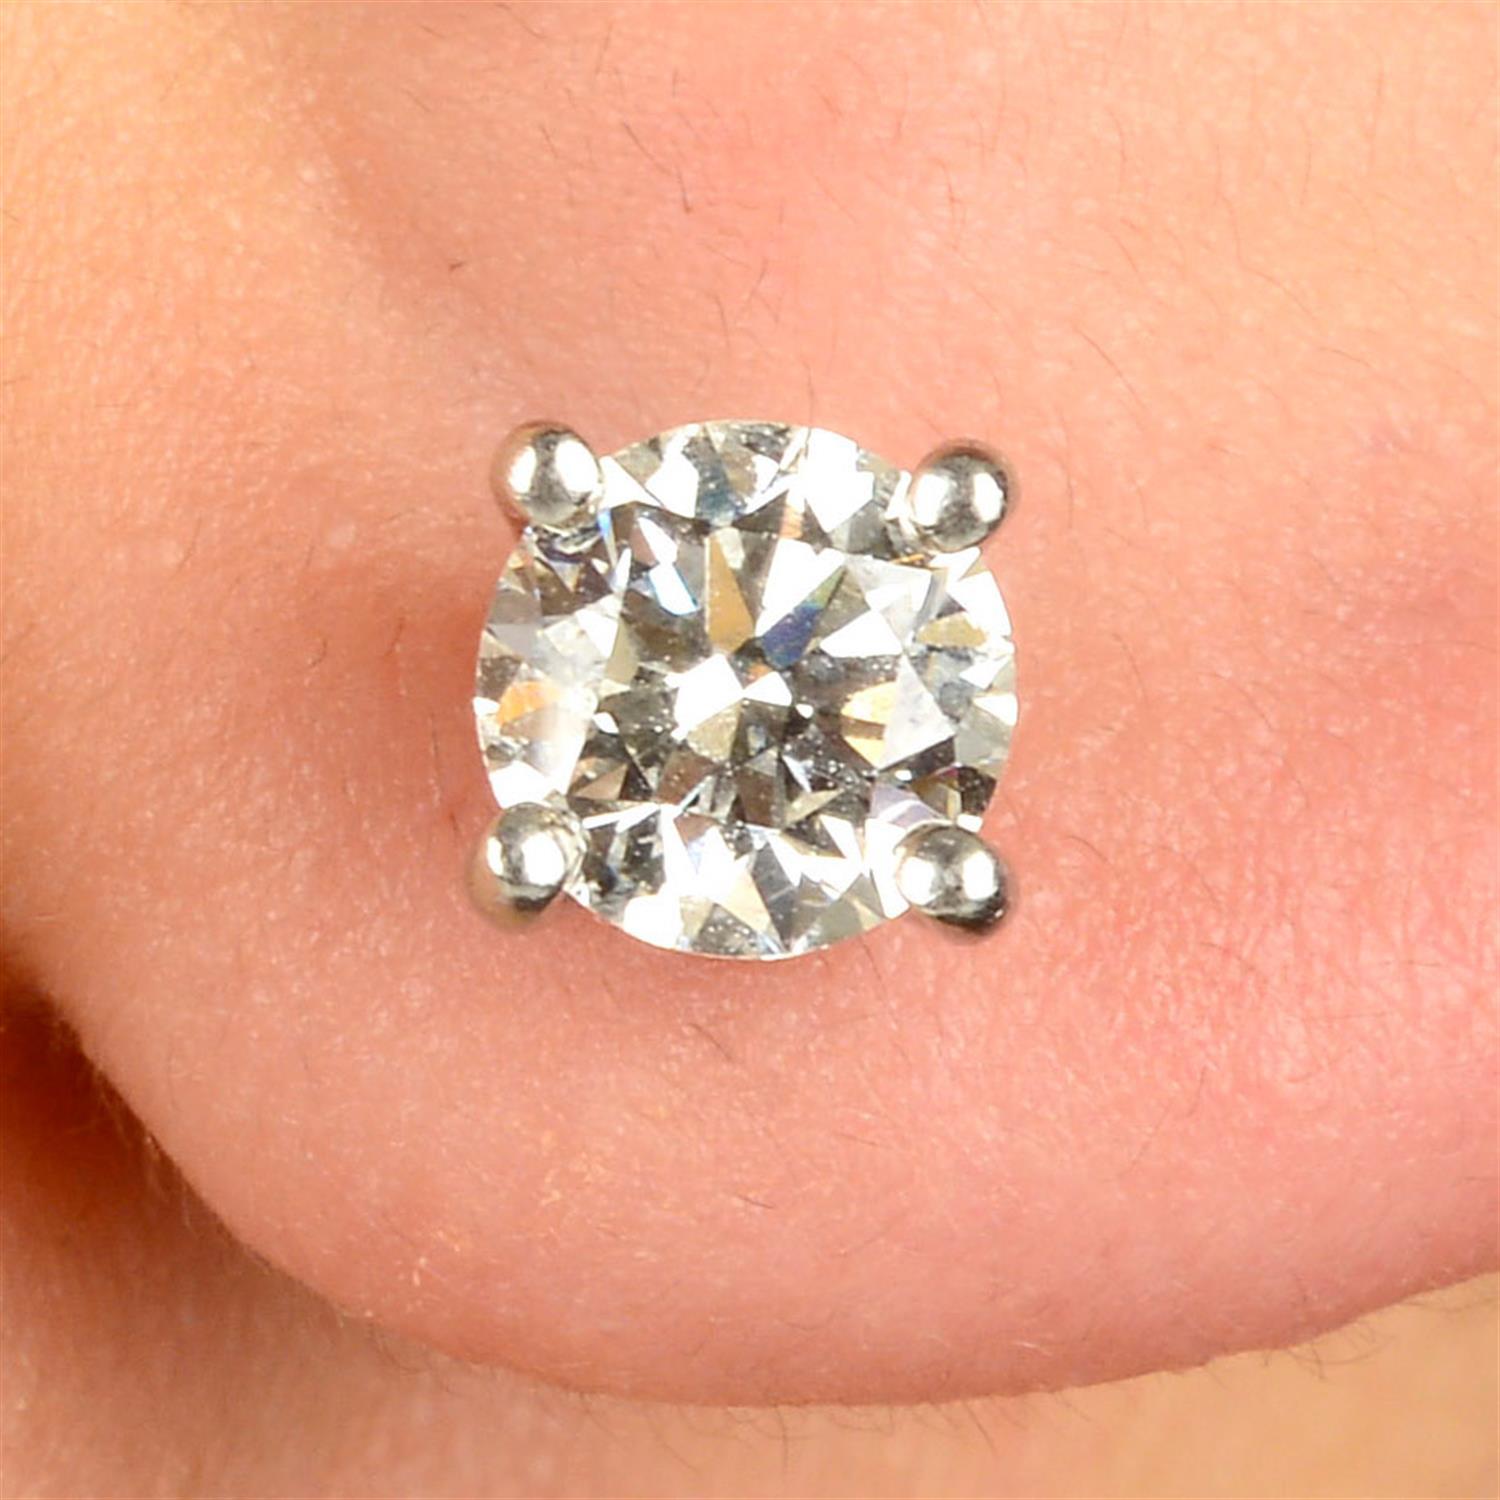 Royal House Antiques

Royal House Antiques is delighted to offer for sale this stunning pair of huge Tiffany & Co Platinum and 1.40ct Diamond Solitaire stud earrings RRP £20,000

An exquisite pair of the finest stud earrings ever made, they have a